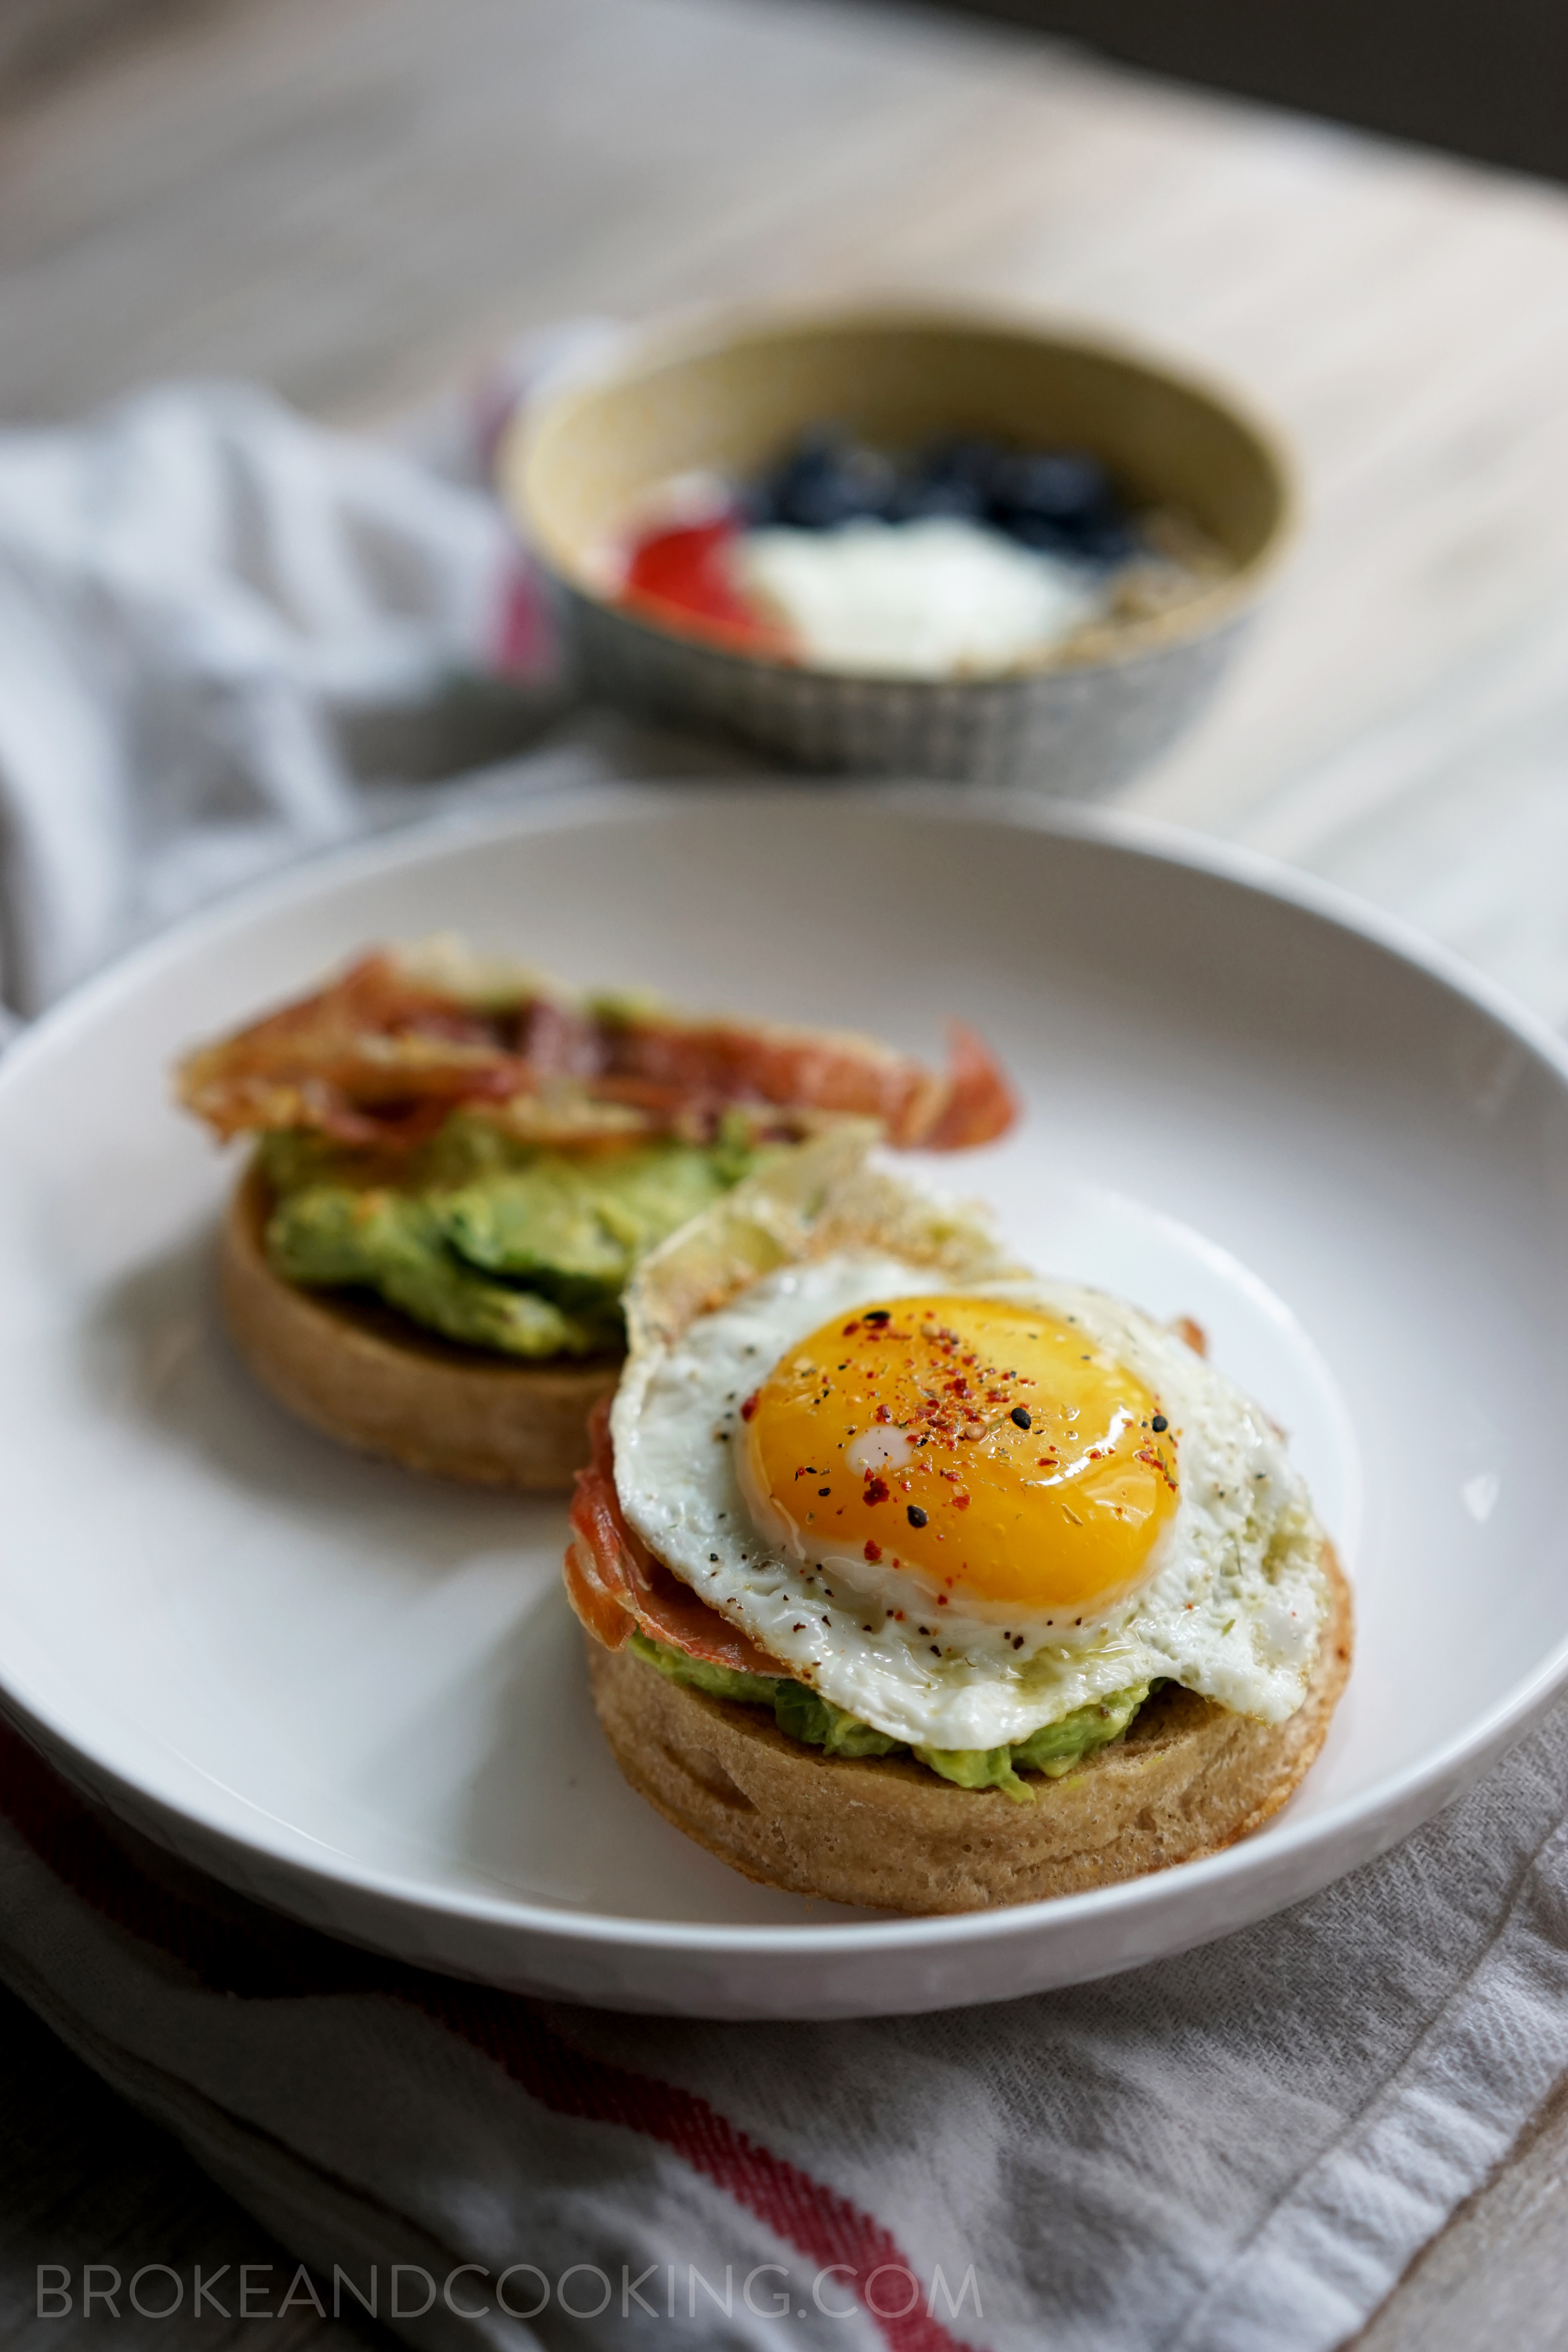 https://images.squarespace-cdn.com/content/v1/55971dafe4b0af241ed11246/1473674703437-P9HHORW9NX5RLE7YUYGC/Crispy+Prosciutto+Breakfast+Sammies+Recipe+by+Broke+and+Cooking+-+www.brokeandcooking.com